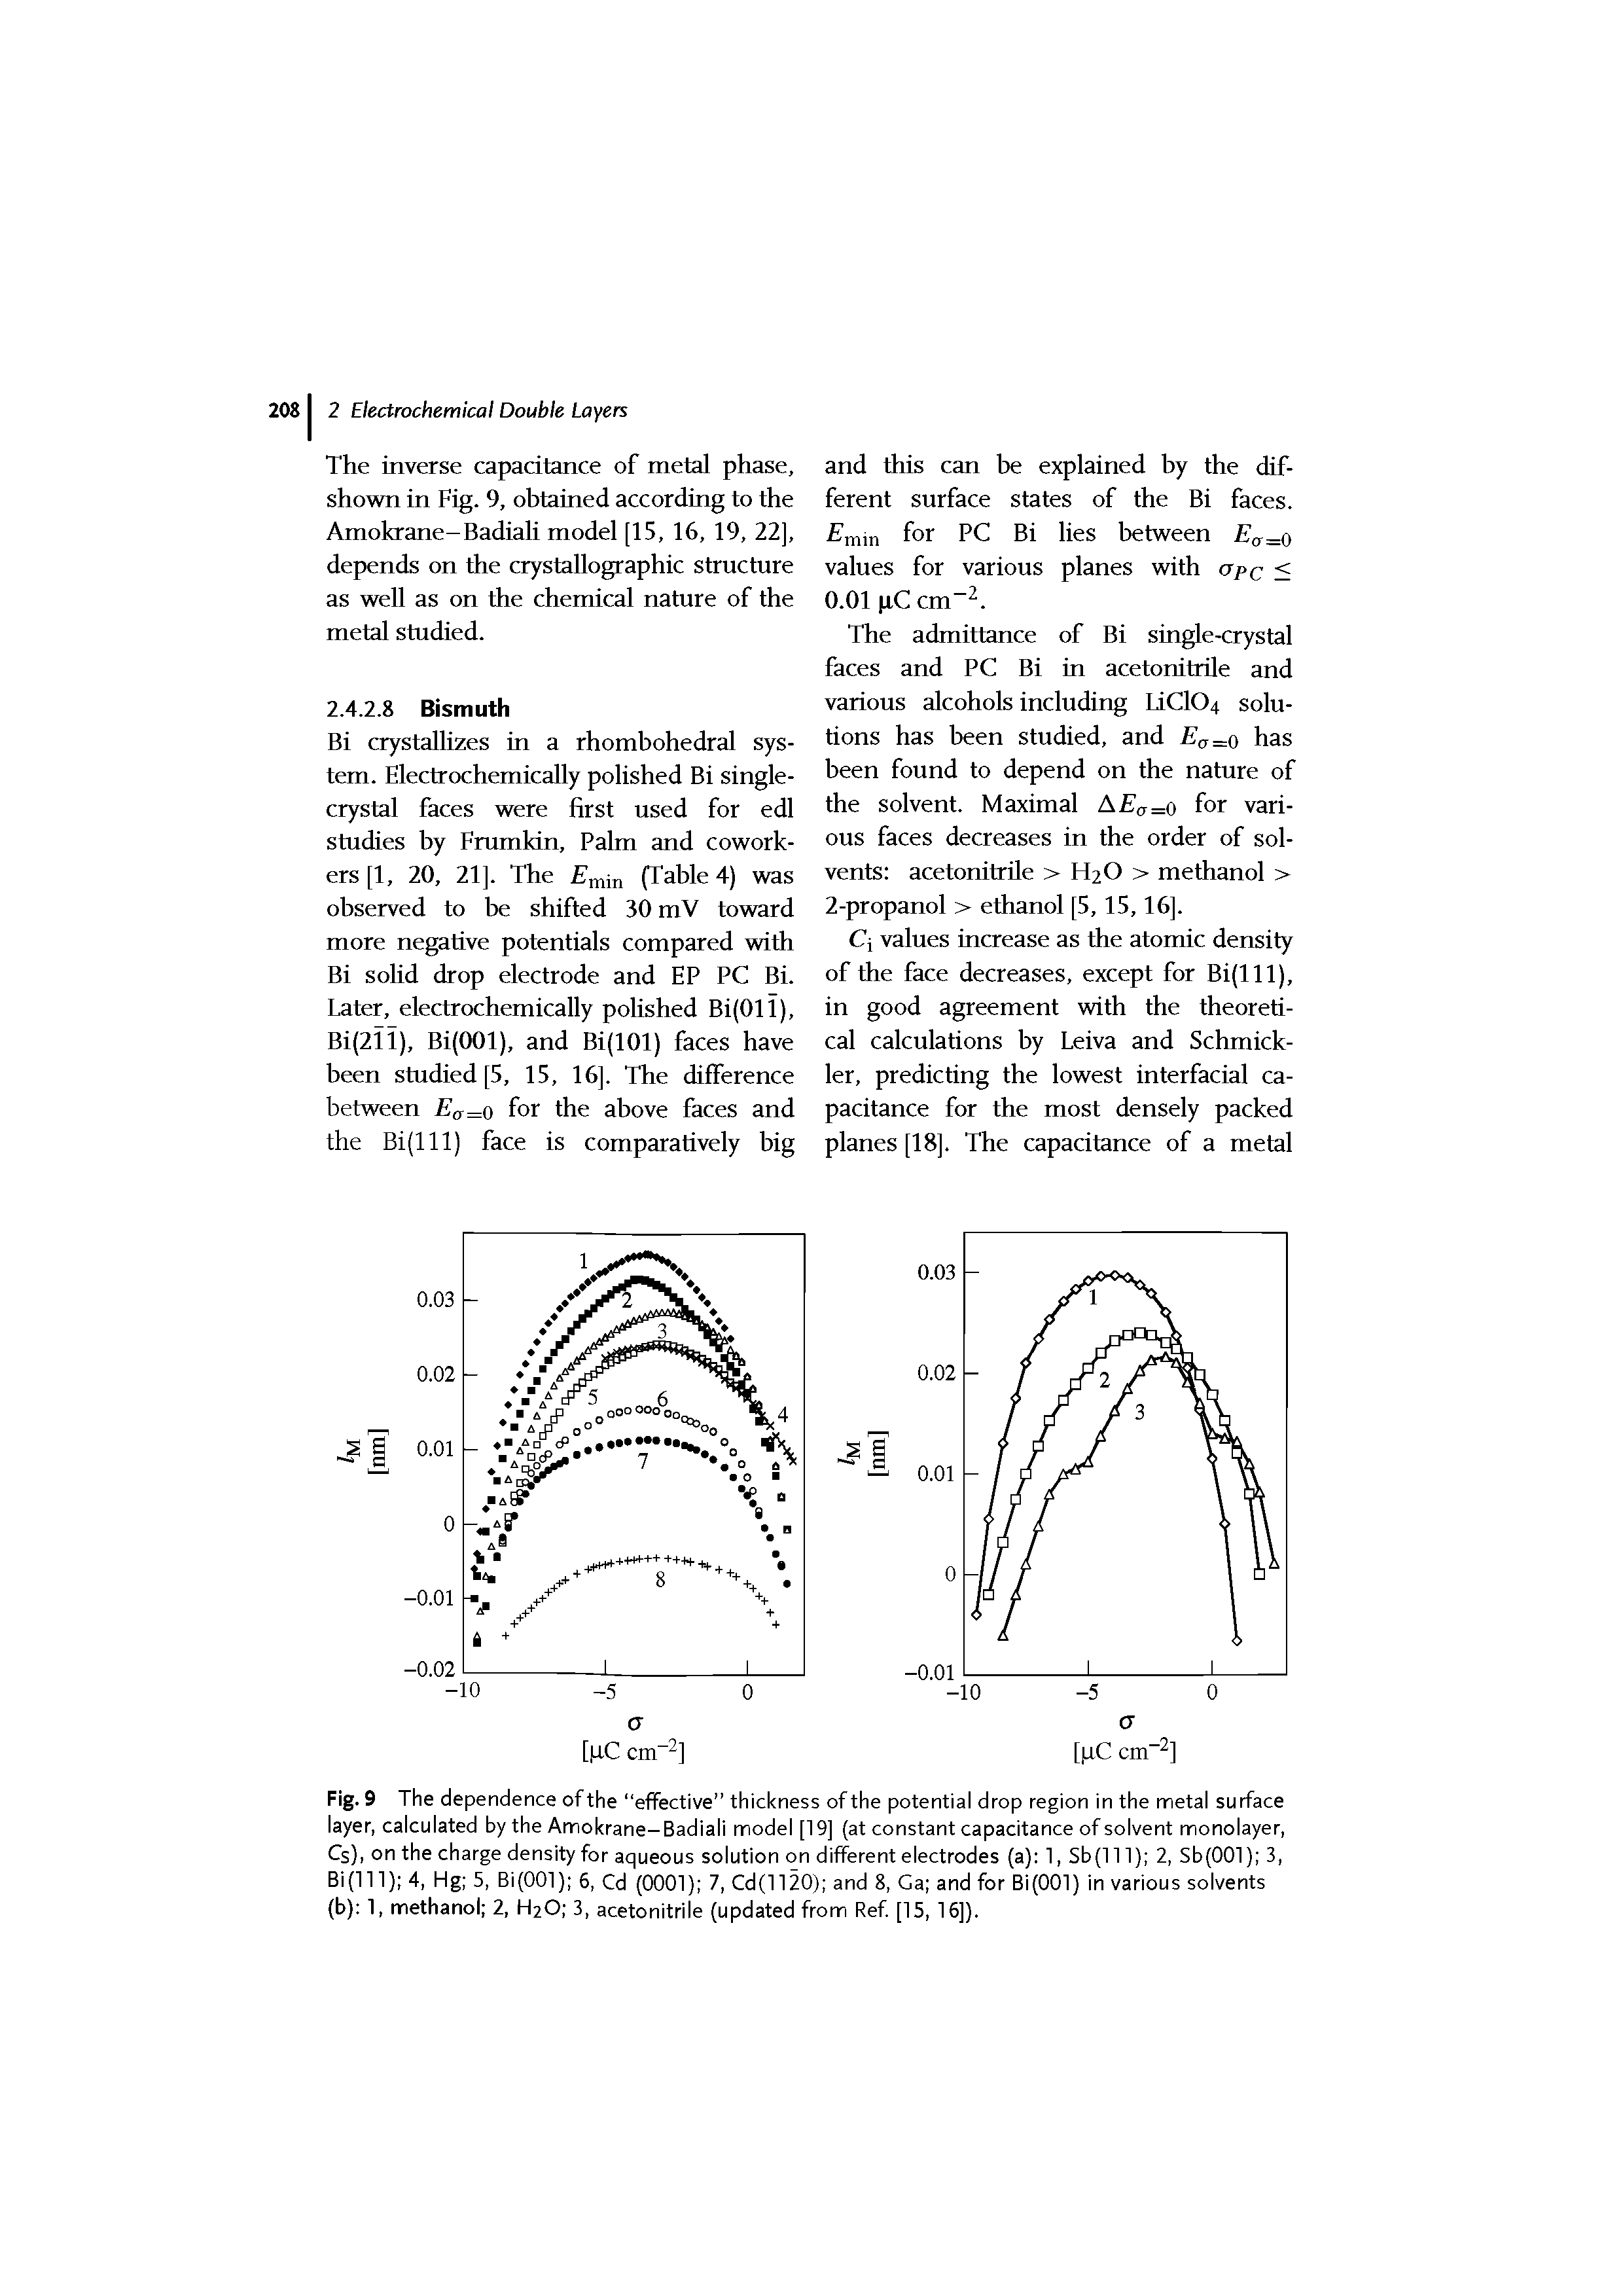 Fig. 9 The dependence of the effective thickness of the potential drop region in the metal surface layer, calculated by the Amokrane-Badiali model [19] (at constant capacitance of solvent monolayer, Cs), on the charge density for aqueous solution on different electrodes (a) 1, Sb(l 11) 2, Sb(OOl) 3, Bi(lll) 4, Hg 5, Bi(OOl) 6, Cd (0001) 7, Cd(1120) and 8, Ga and for Bi(OOl) in various solvents (b) 1, methanol 2, H2O 3, acetonitrile (updated from Ref [15, 15]).